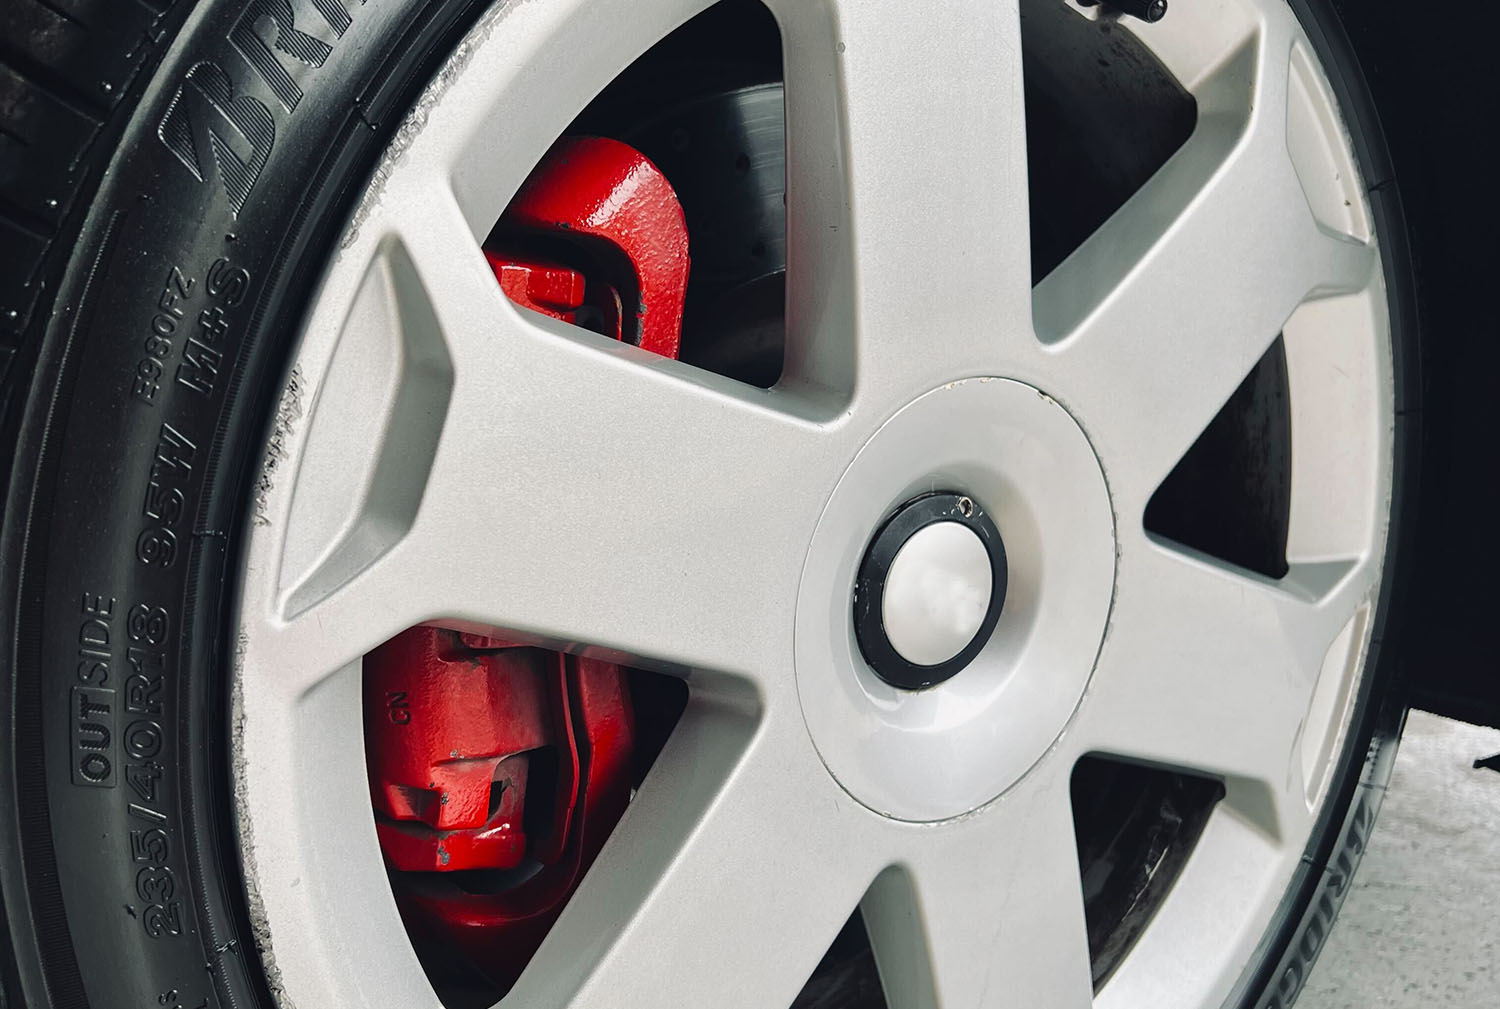  Wheel and tire with view of red brake caliper and brake rotor